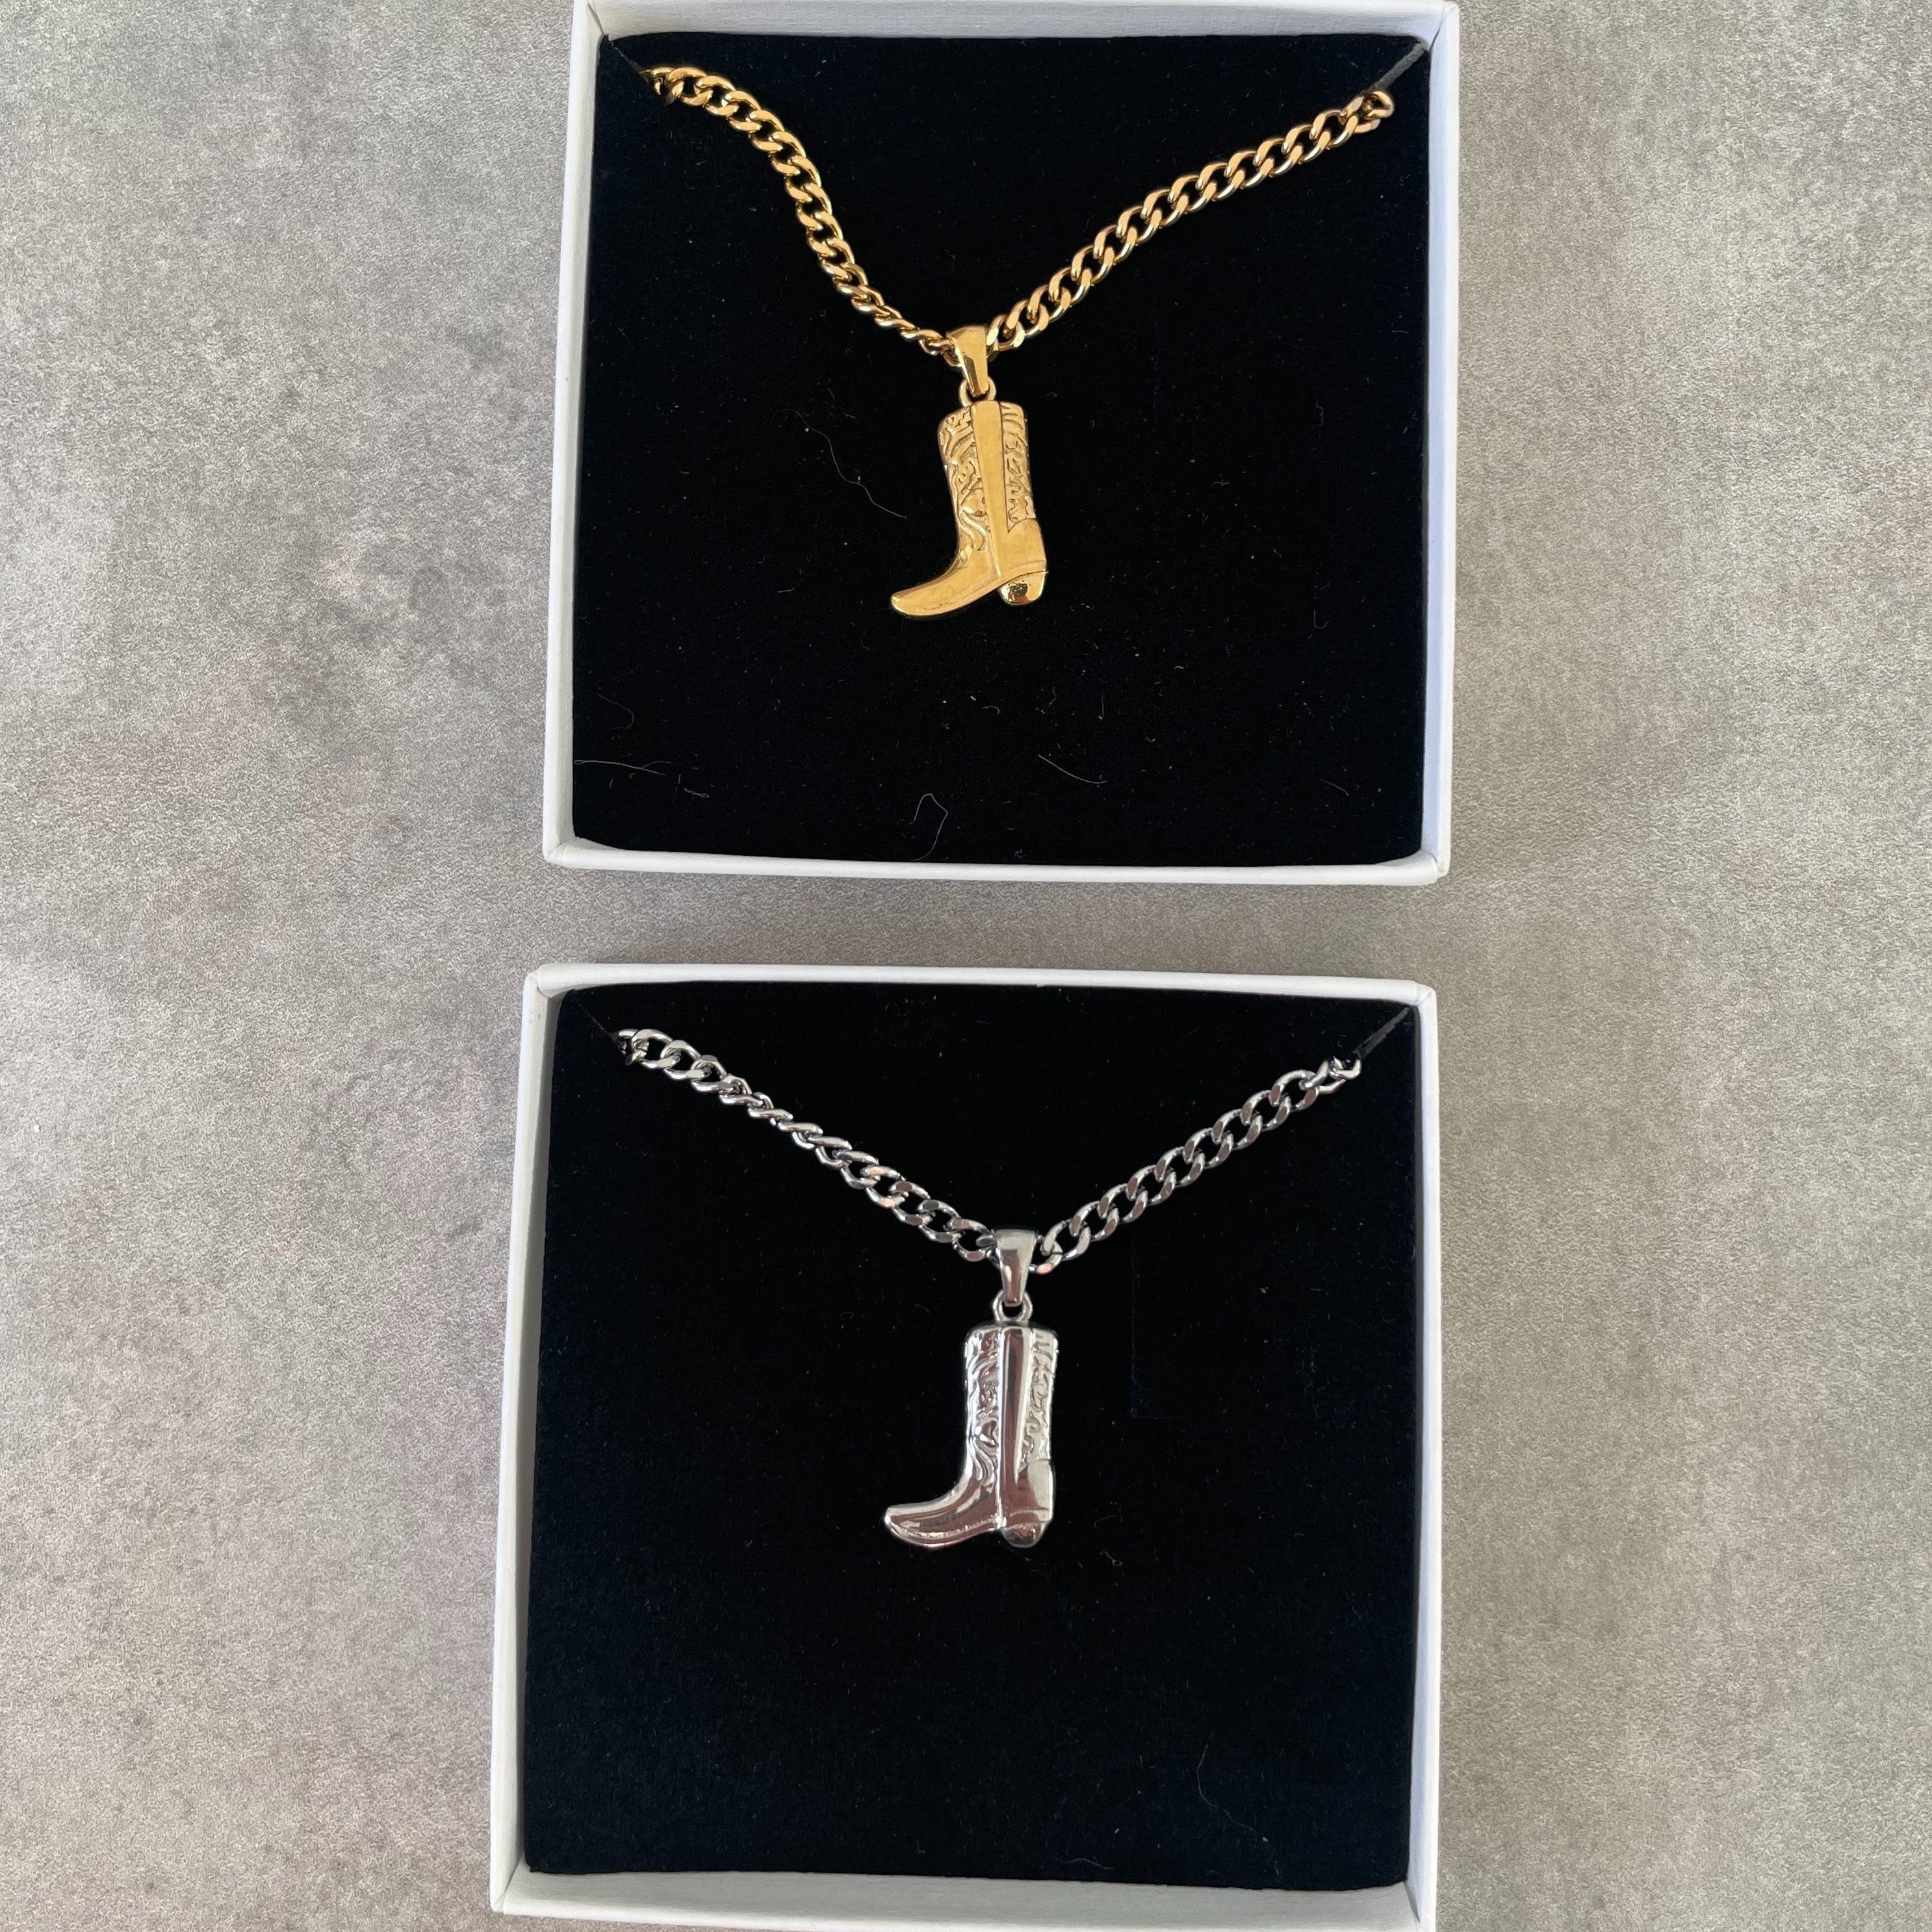 Latest jewellery trends with a cowboy boot necklace